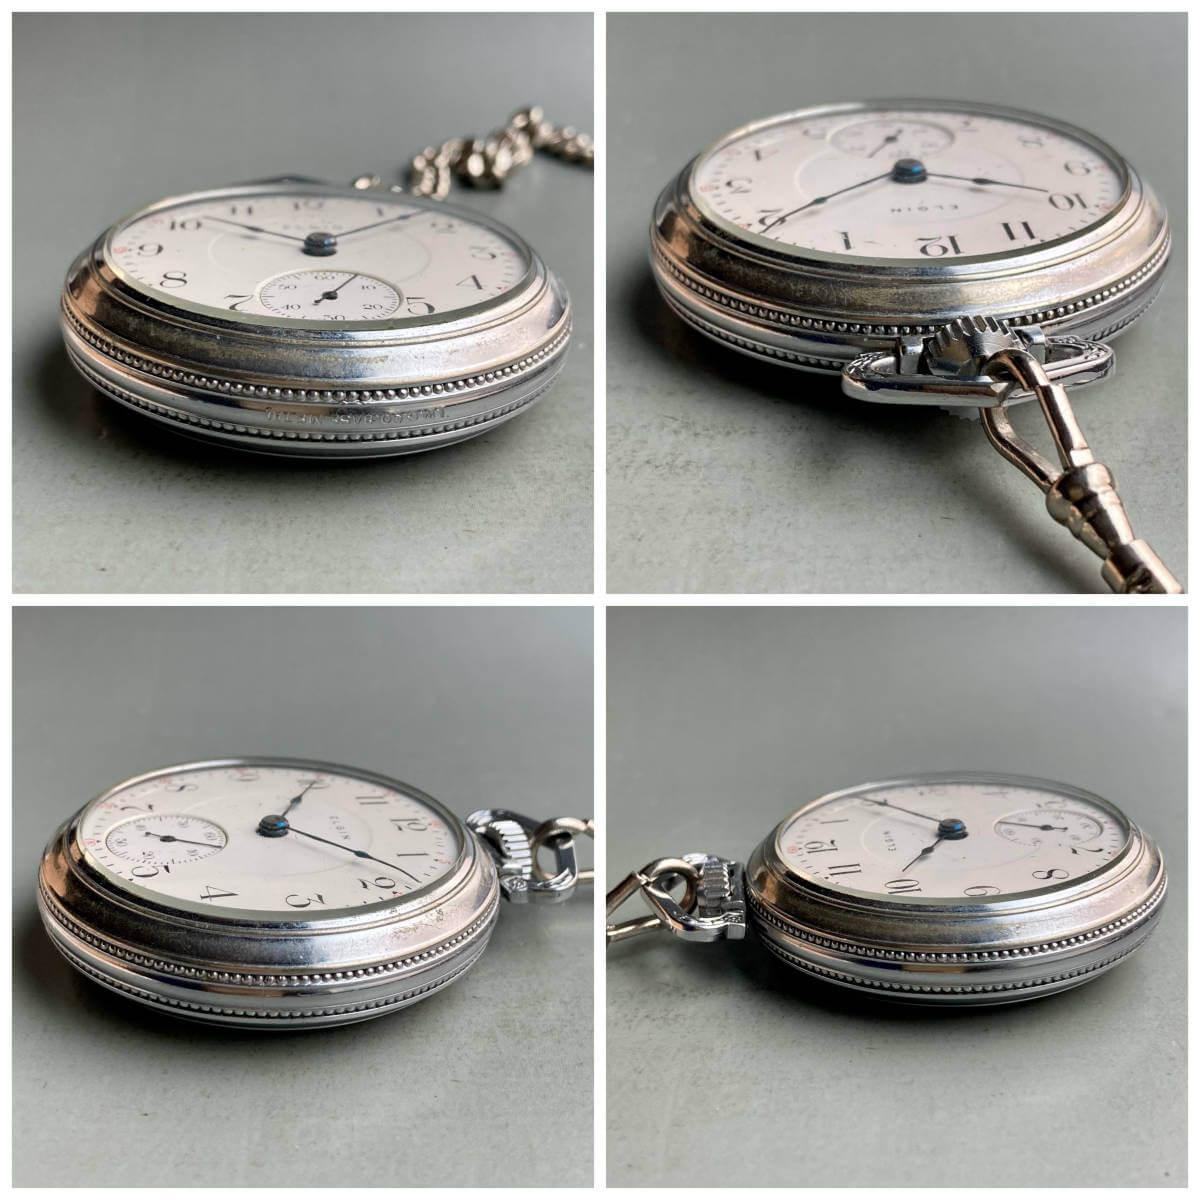 Elgin Pocket Watch 1950s Antique Manual 53mm Vintage - Murphy Johnson Watches Co.